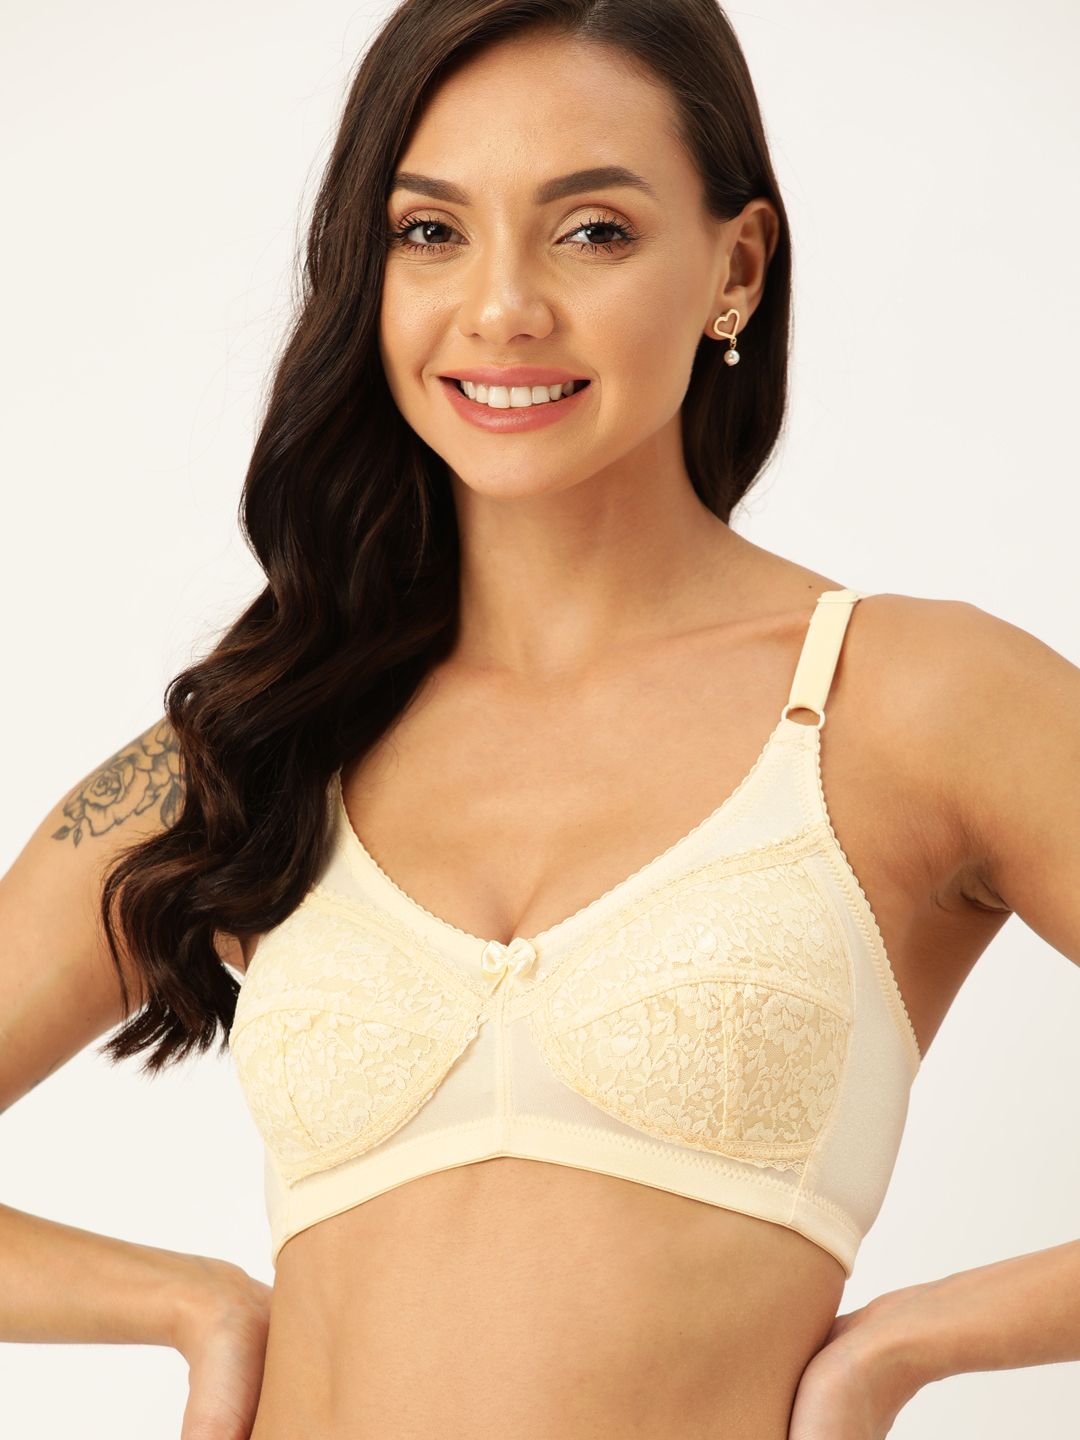 SAVE ₹465 on DressBerry Cream-Coloured Floral Lace Everyday Bra - Full  Coverage